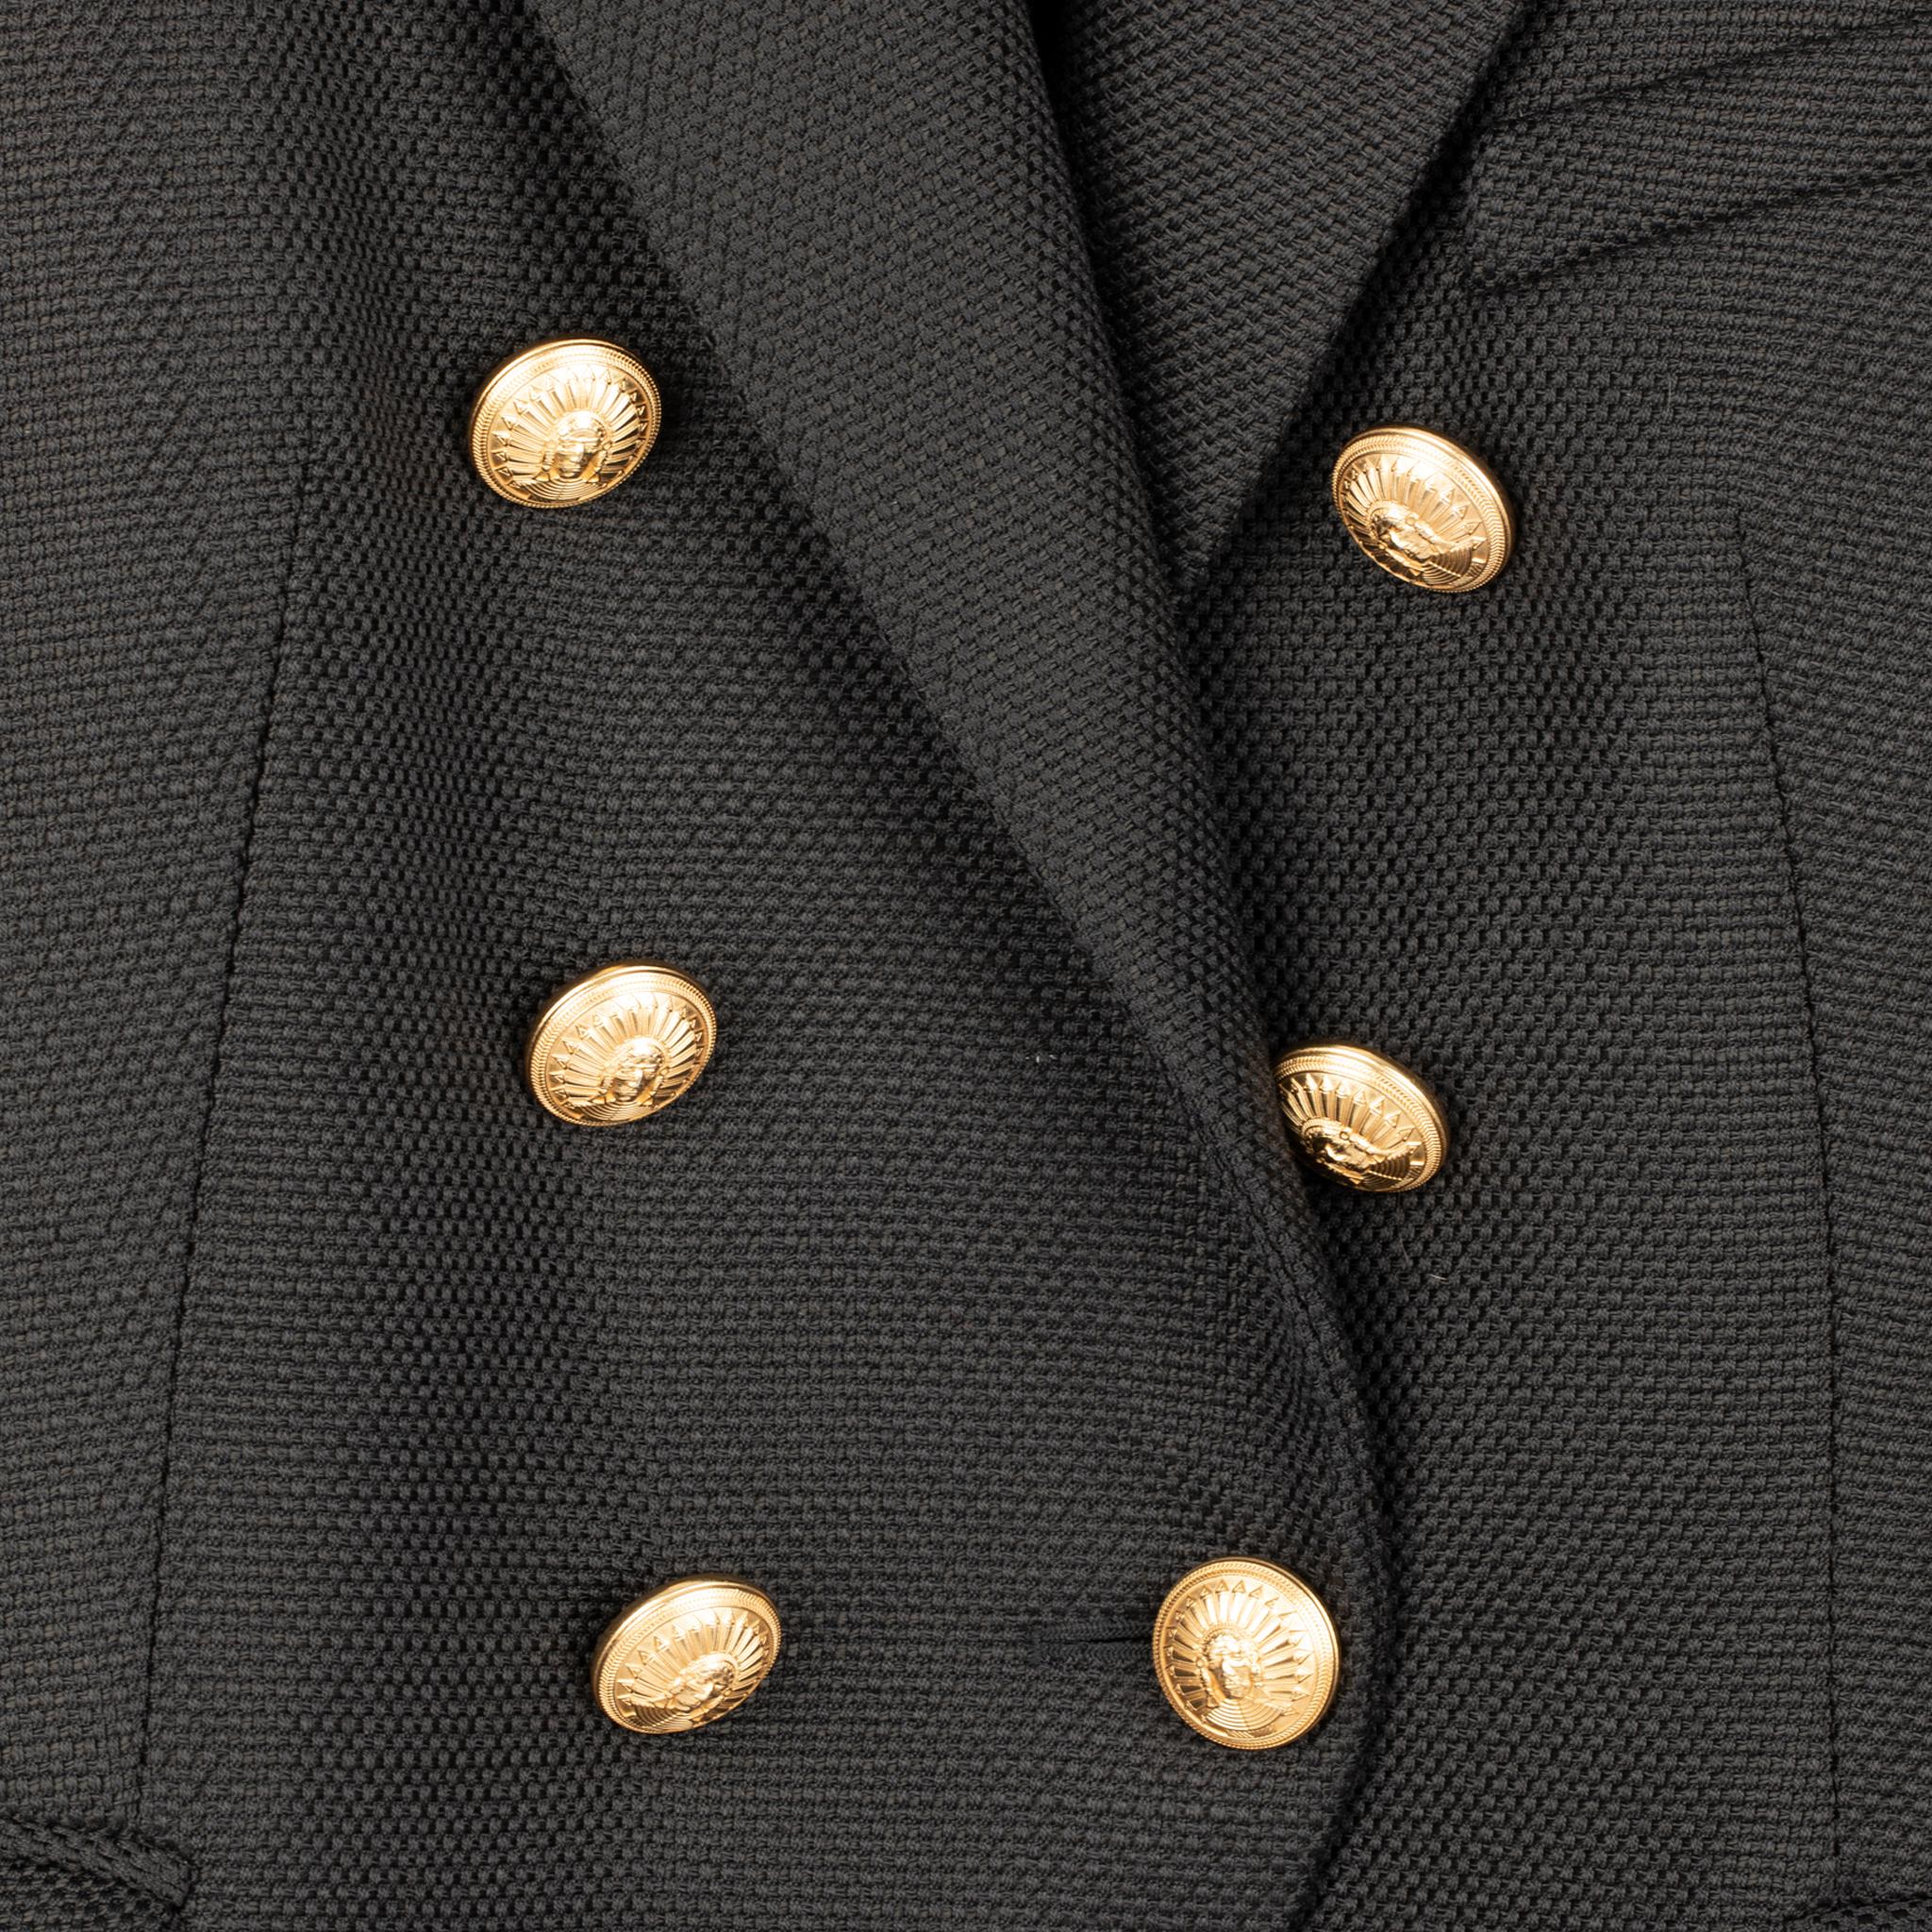 Balmain Womens Six Button Blazer Black

Brand:

Balmain

Product:

Six Button Blazer 

Size:

40 Fr

Colour:

Black

Material:

100% Viscose

Condition:

Preloved; Excellent

Details:

- Six Gold Buttons

- One Interior Pocket

- Three Front